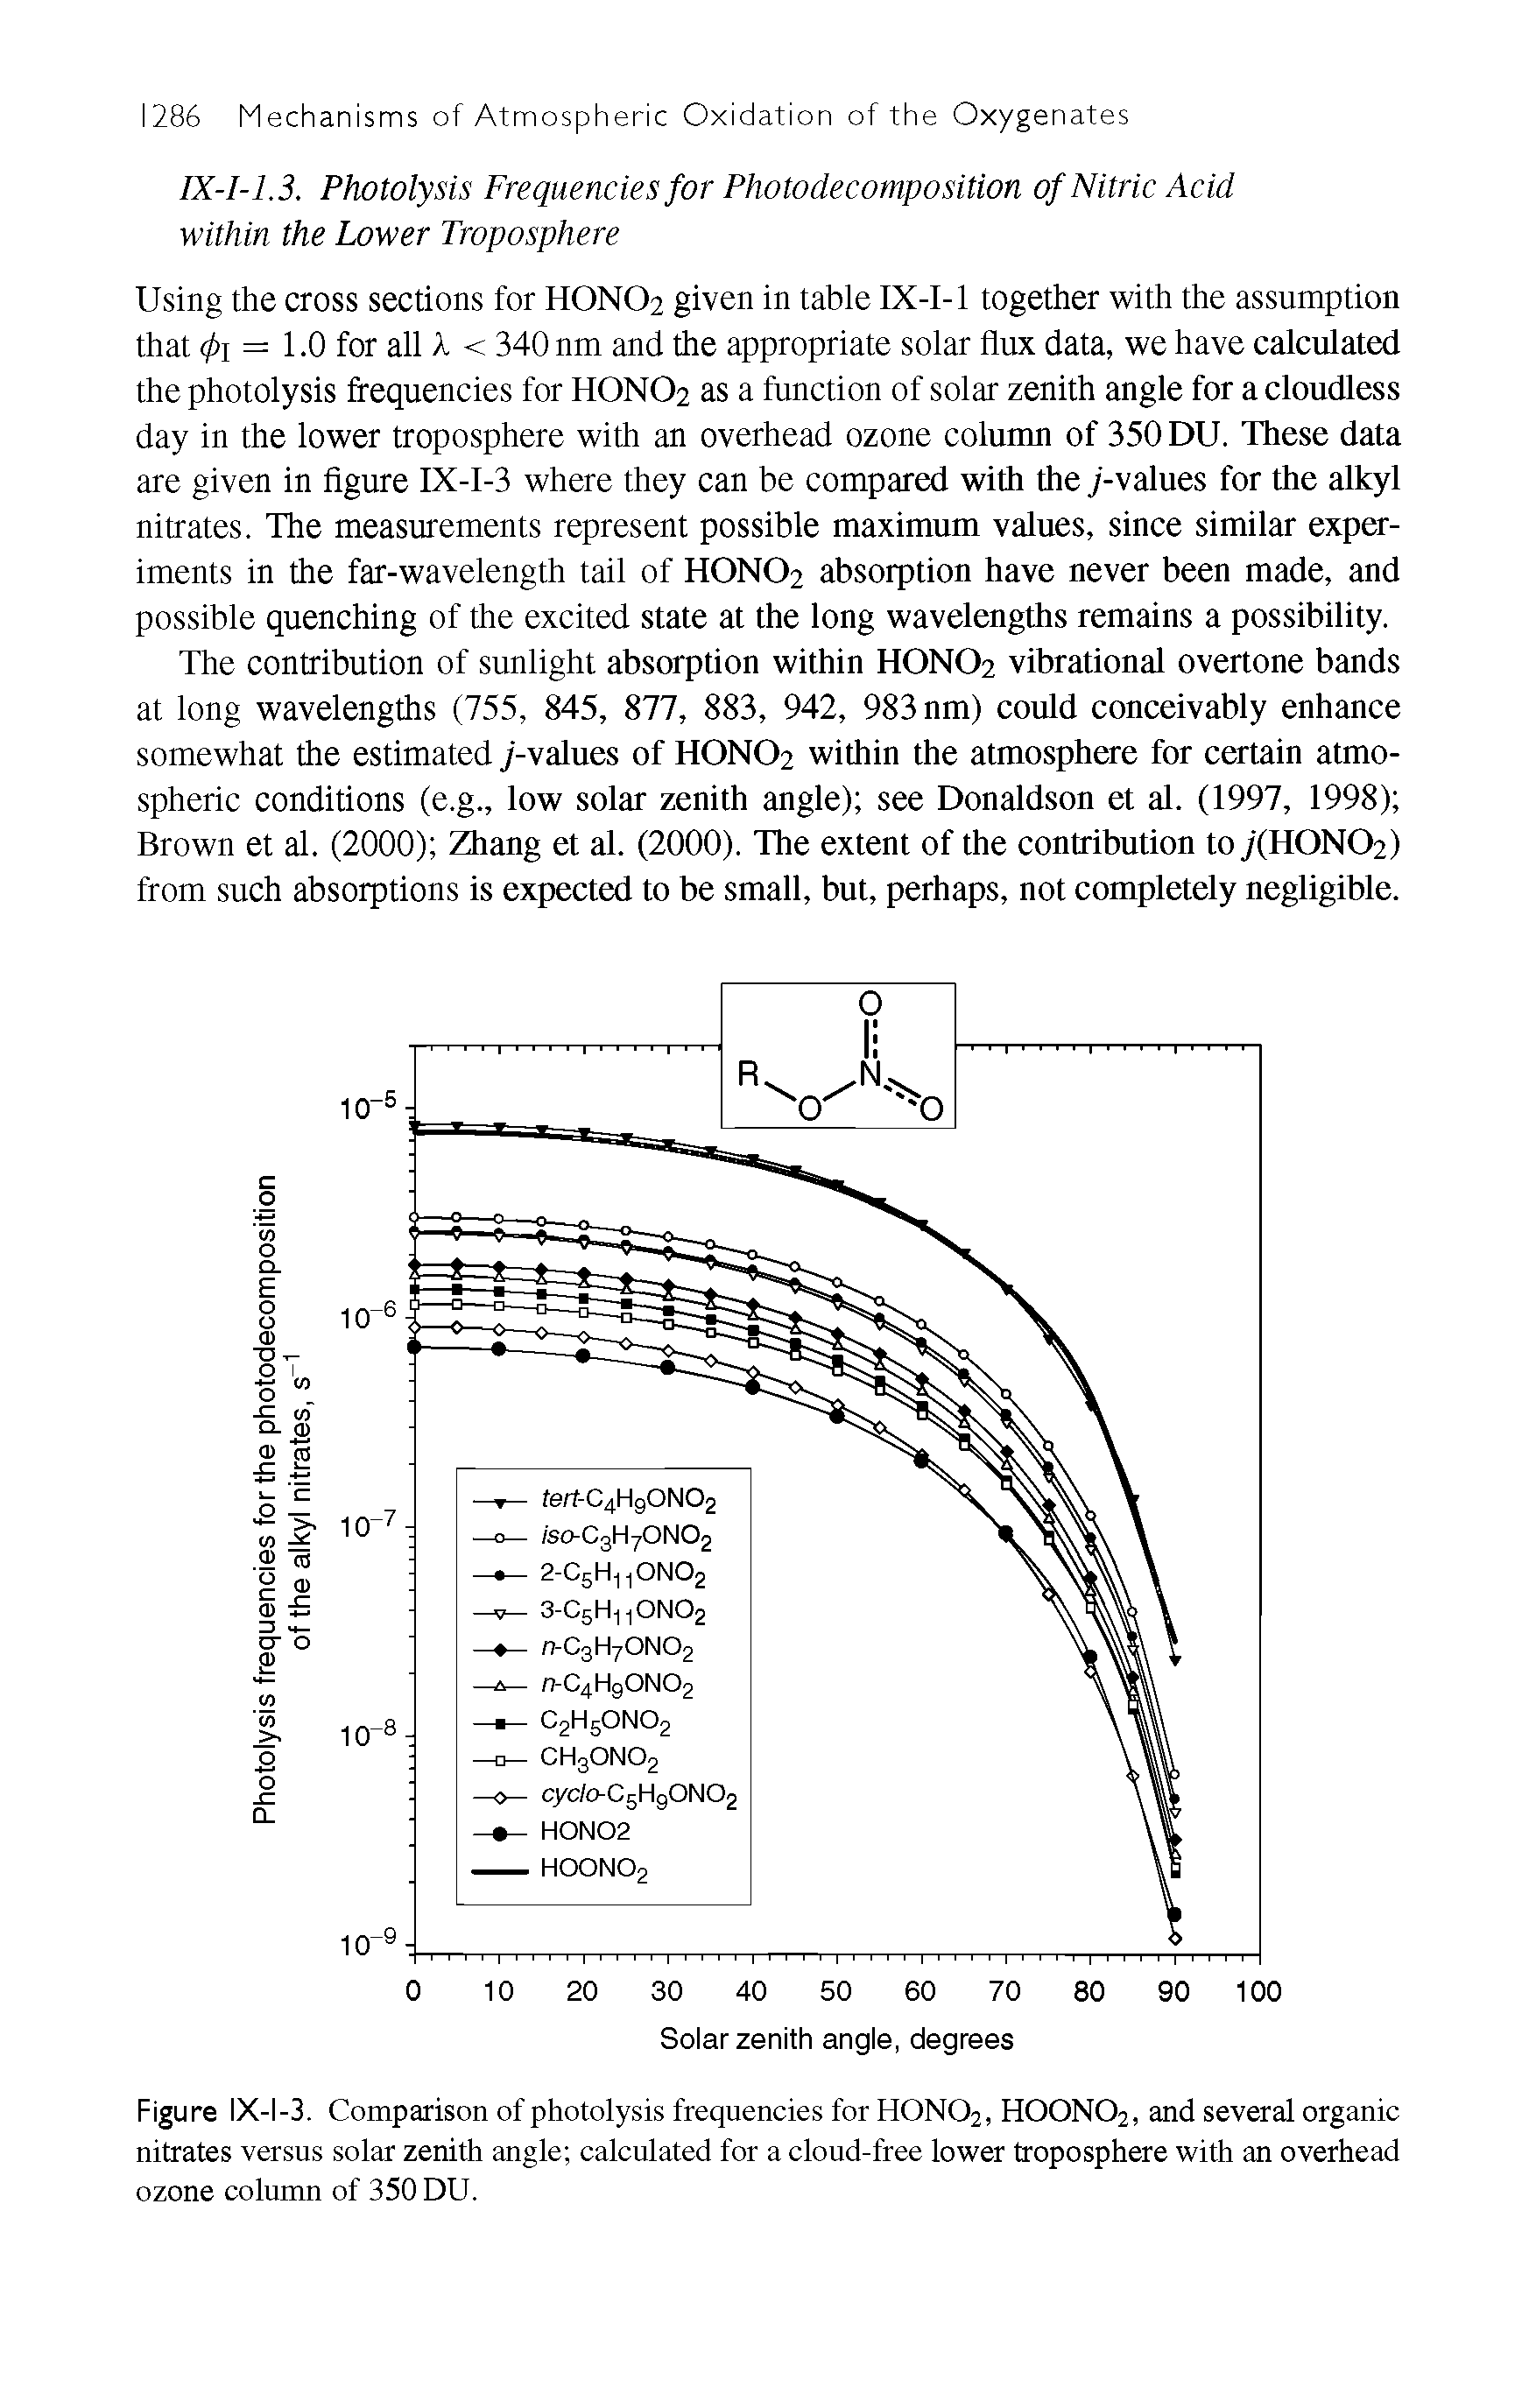 Figure IX-I-3. Comparison of photolysis frequencies for HONO2, HOONO2, and several organic nitrates versus solar zenith angle calculated for a cloud-free lower troposphere with an overhead ozone colurtm of 350 DU.